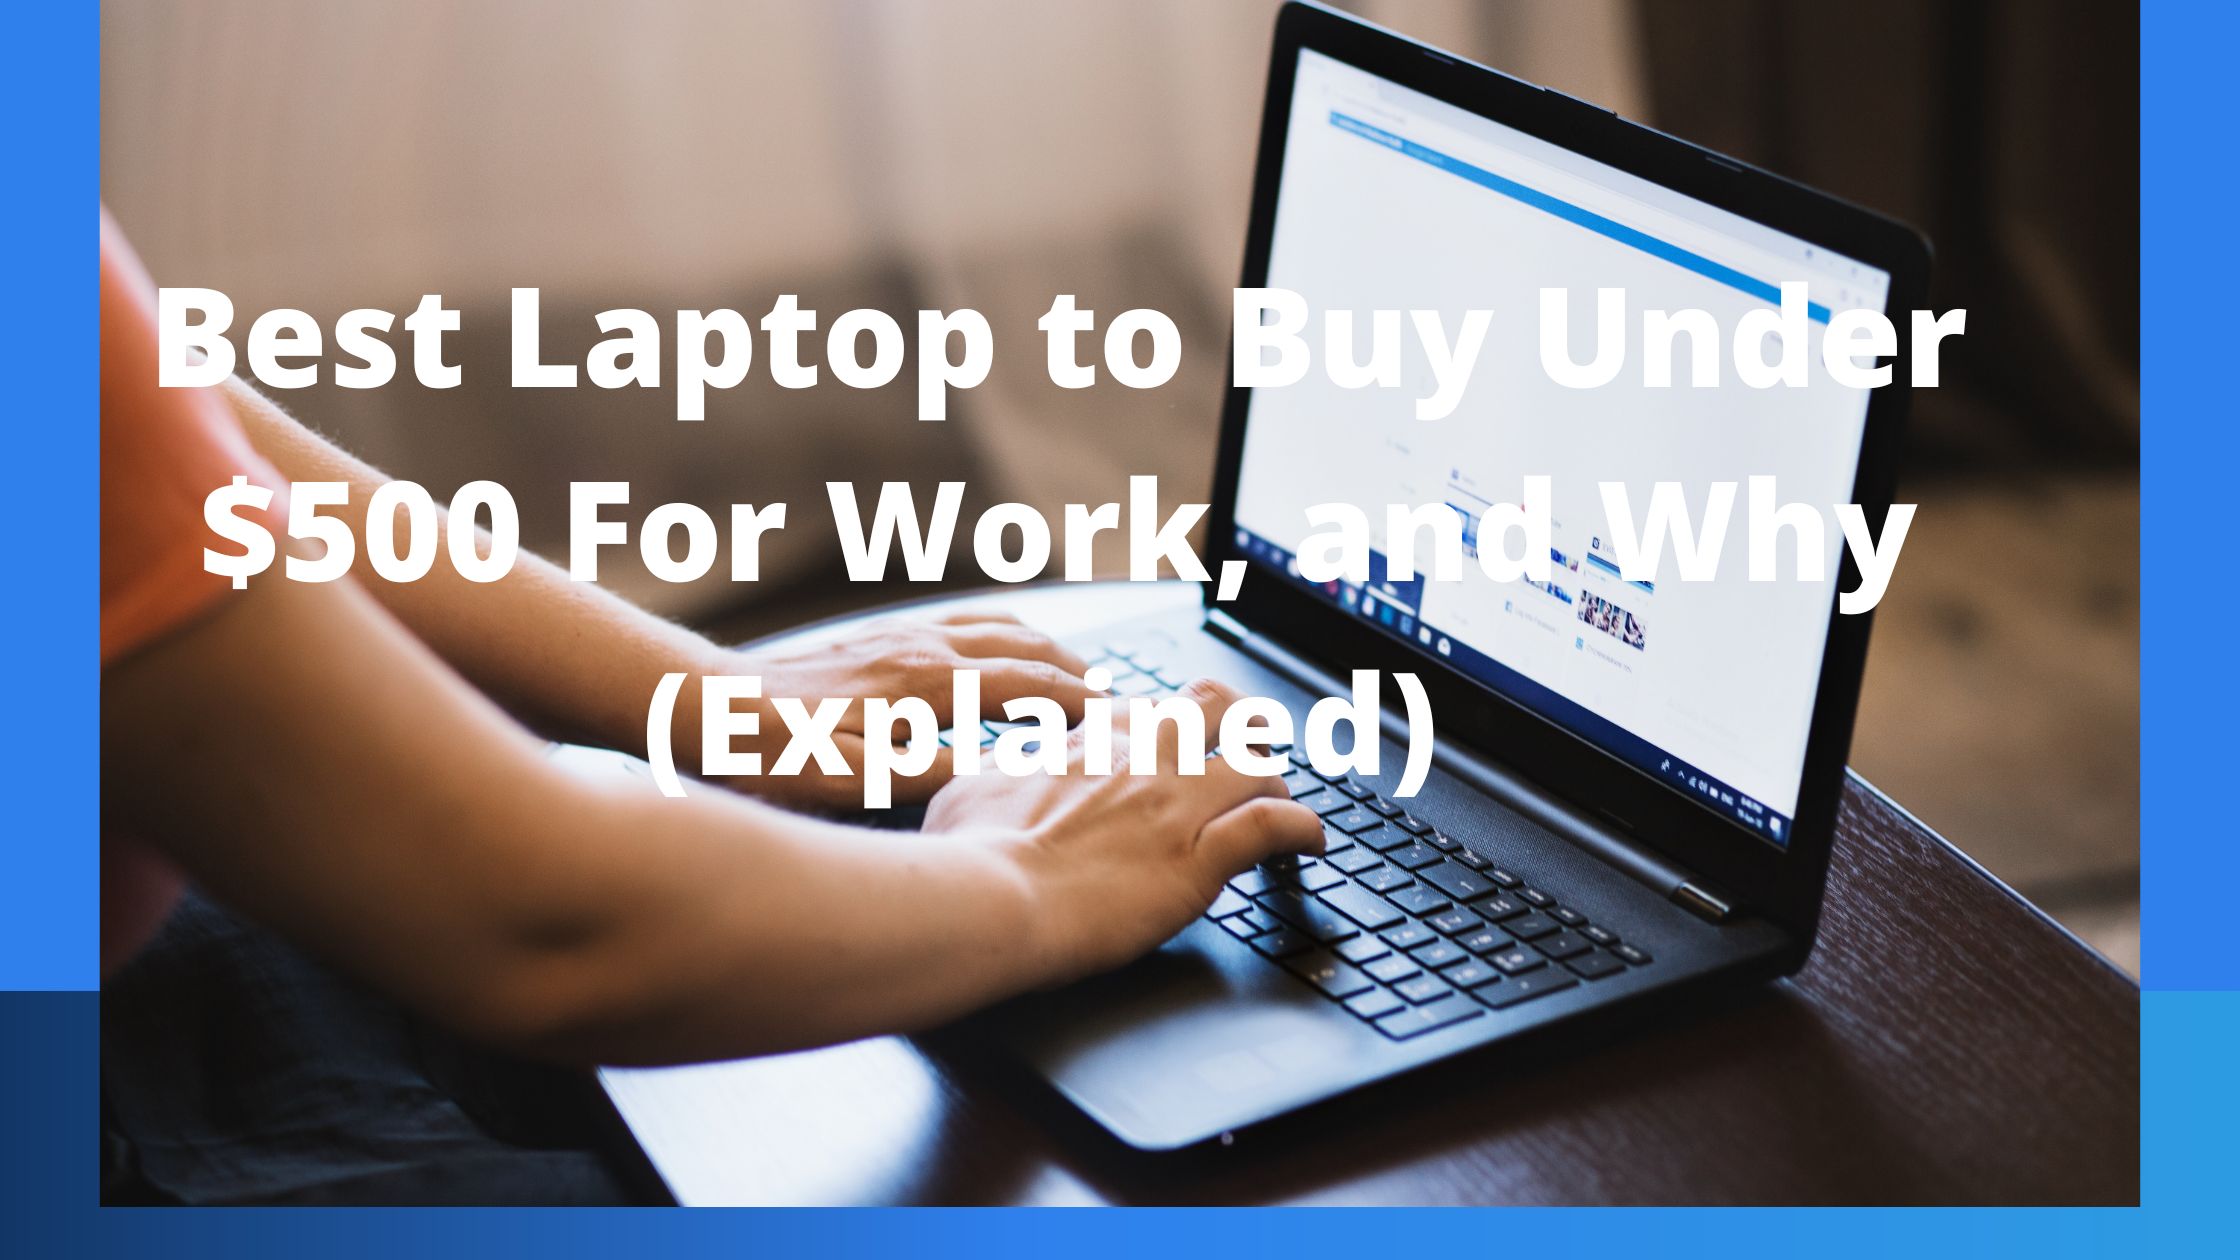 Best Laptop to Buy Under $500 For Work, and Why (Explained)